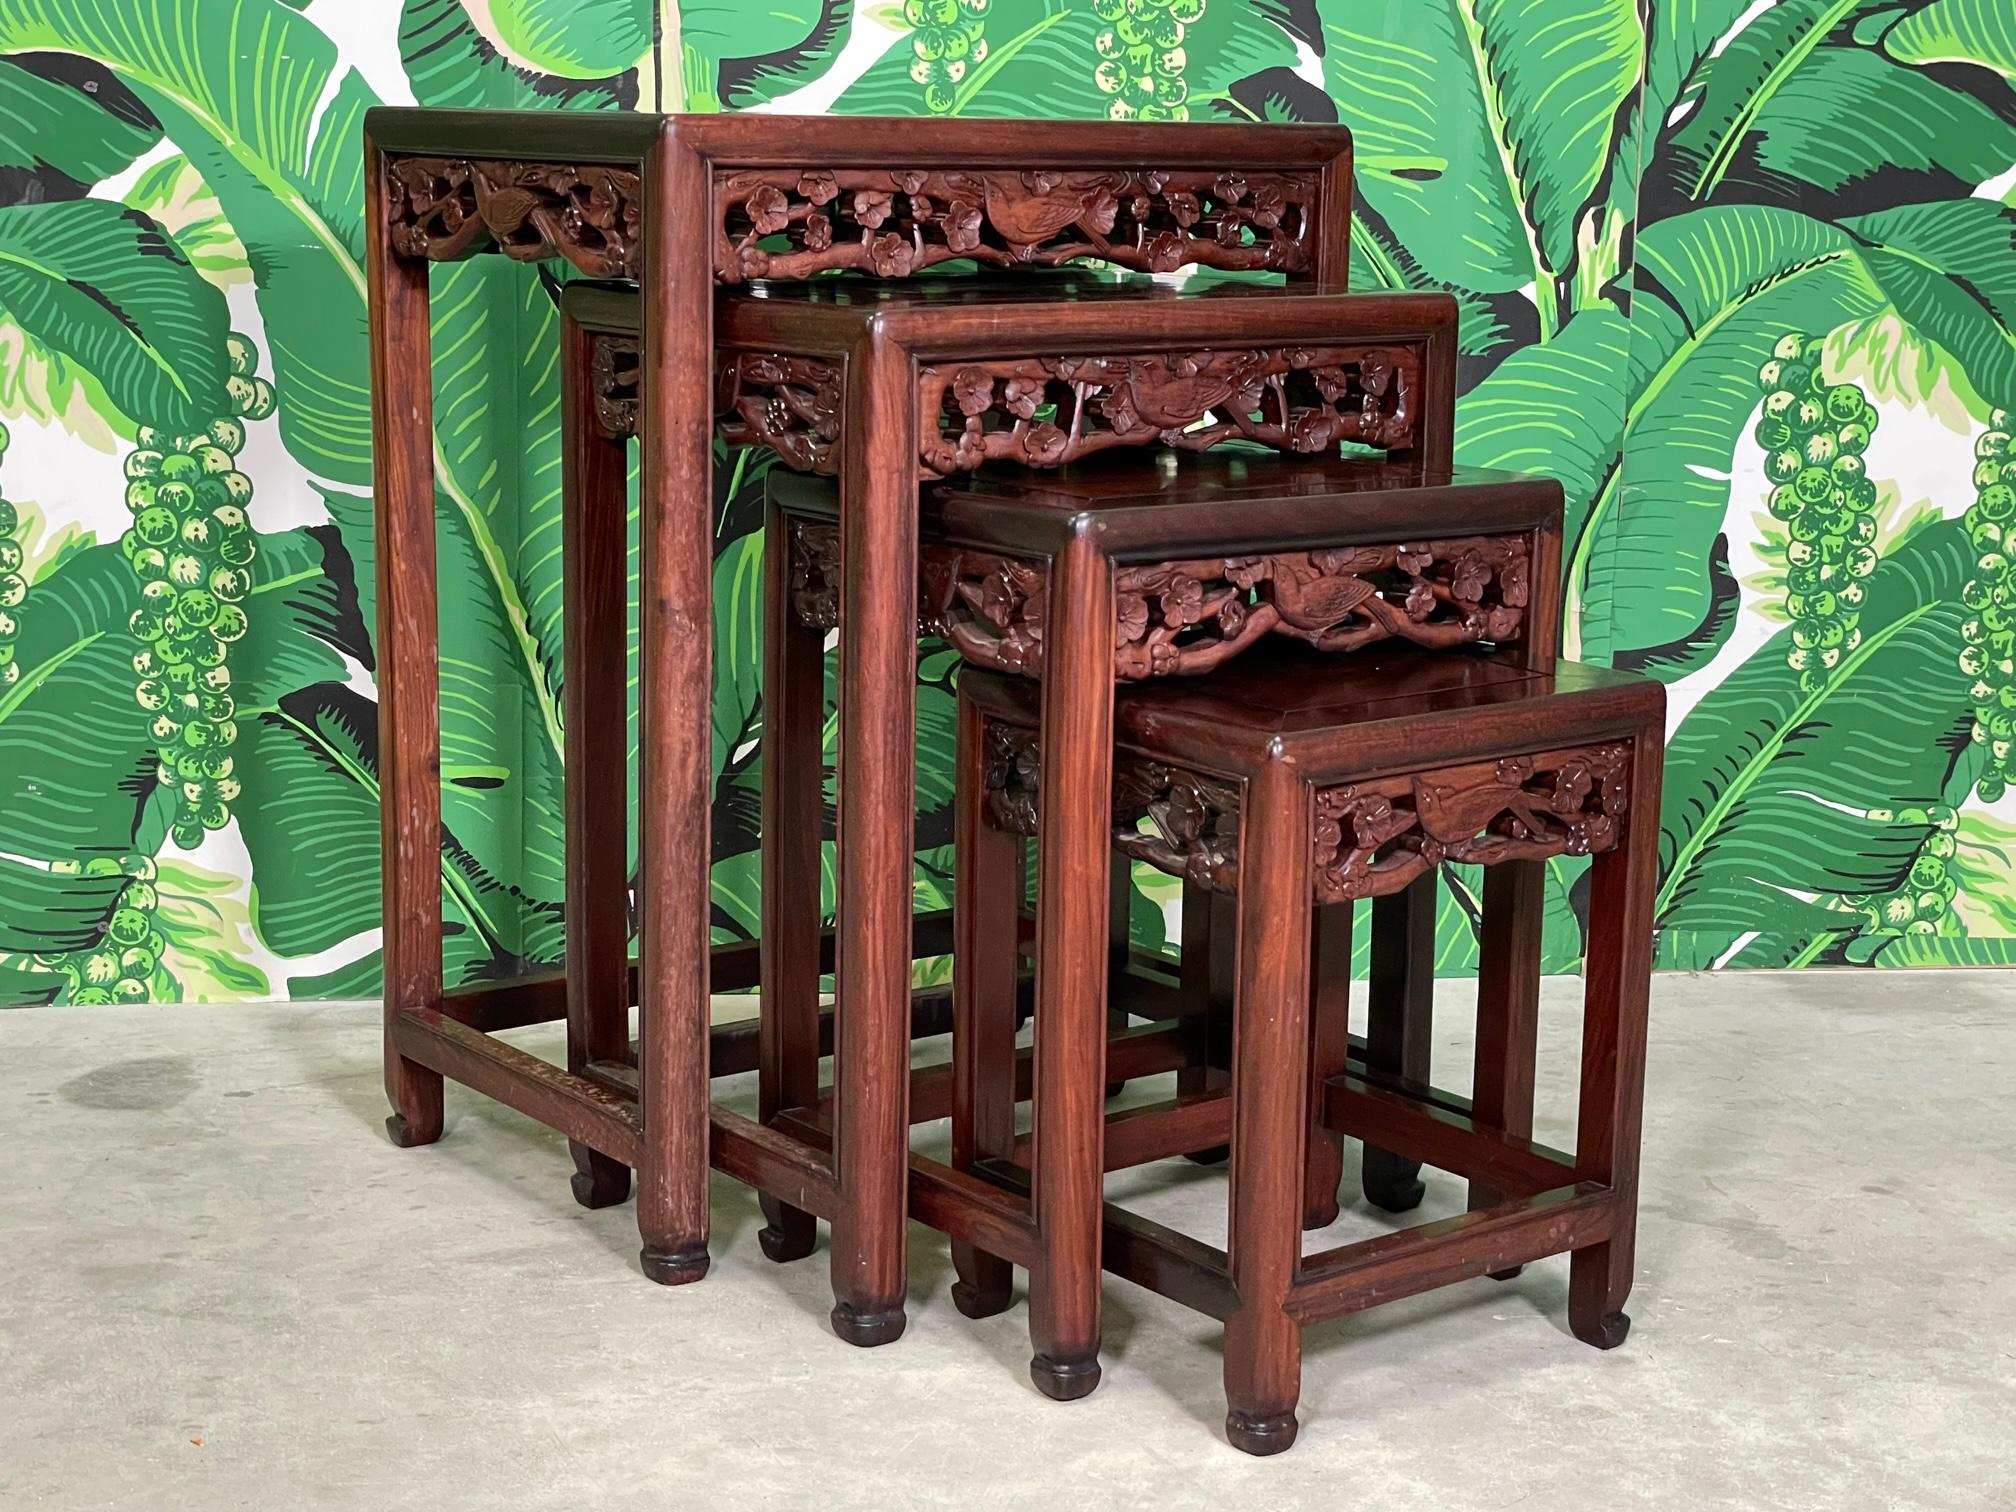 Set of four Asian modern exotic wood nesting tables or stacking tables feature hand carved friezes with birds and flowers. Good condition with minor imperfections consistent with age. Some discoloration on top of largest table. Pieces may exhibit